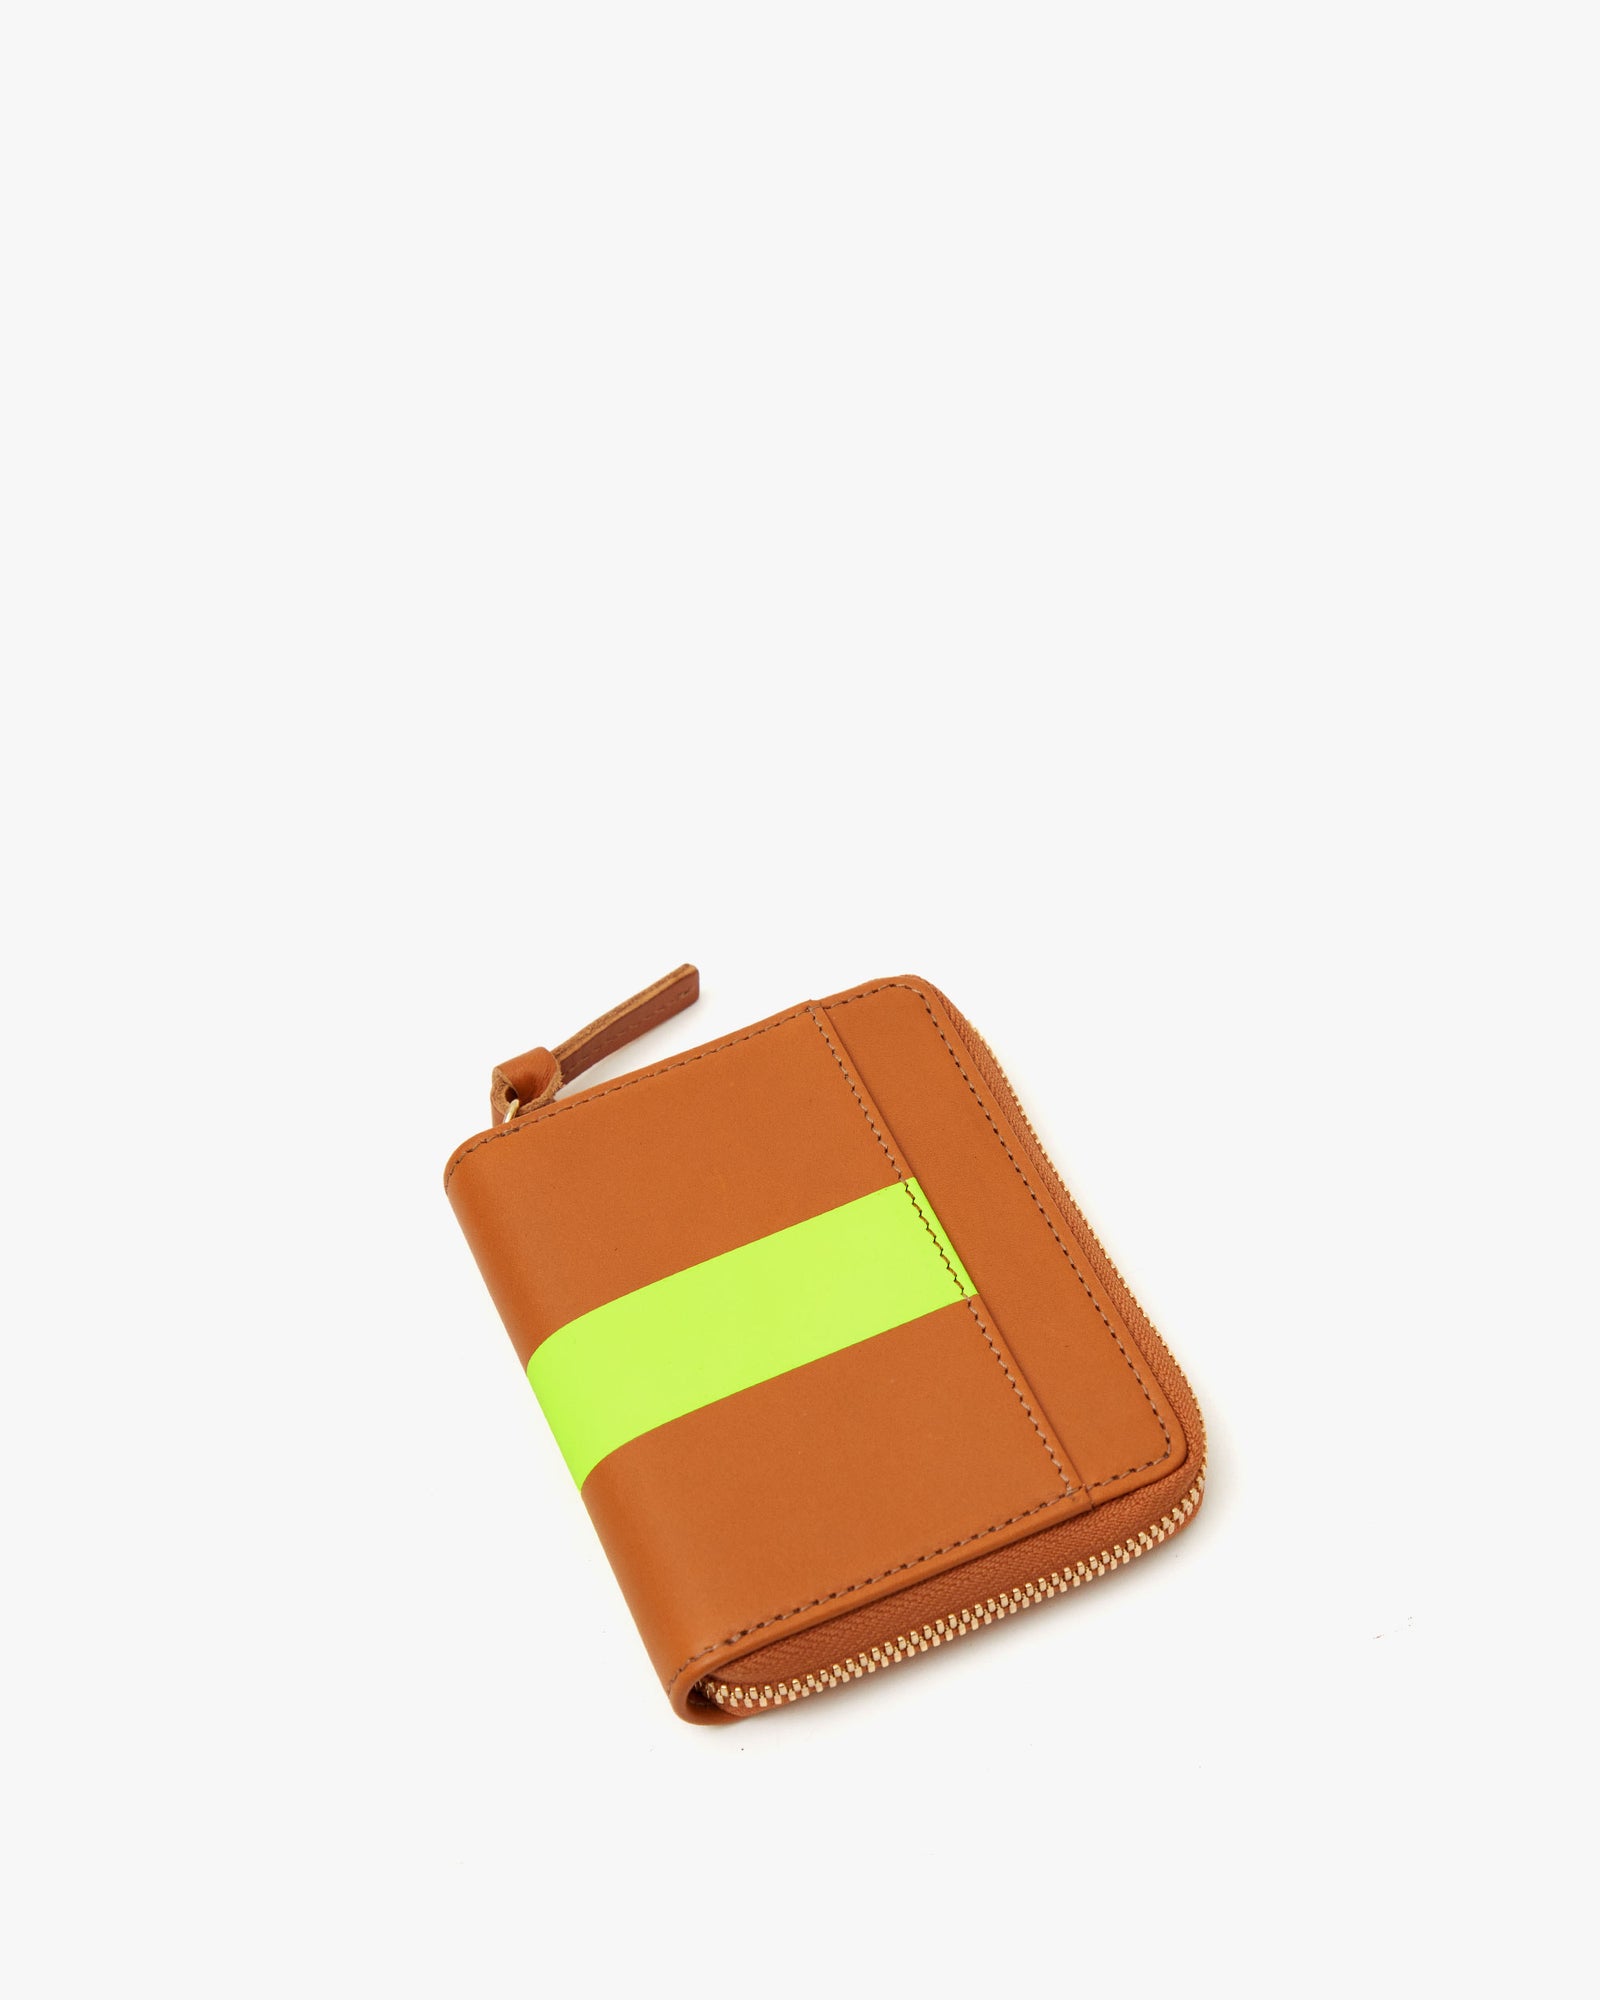 back view of the Cuoio w/ Neon Yellow Stripe Petit Zip Wallet